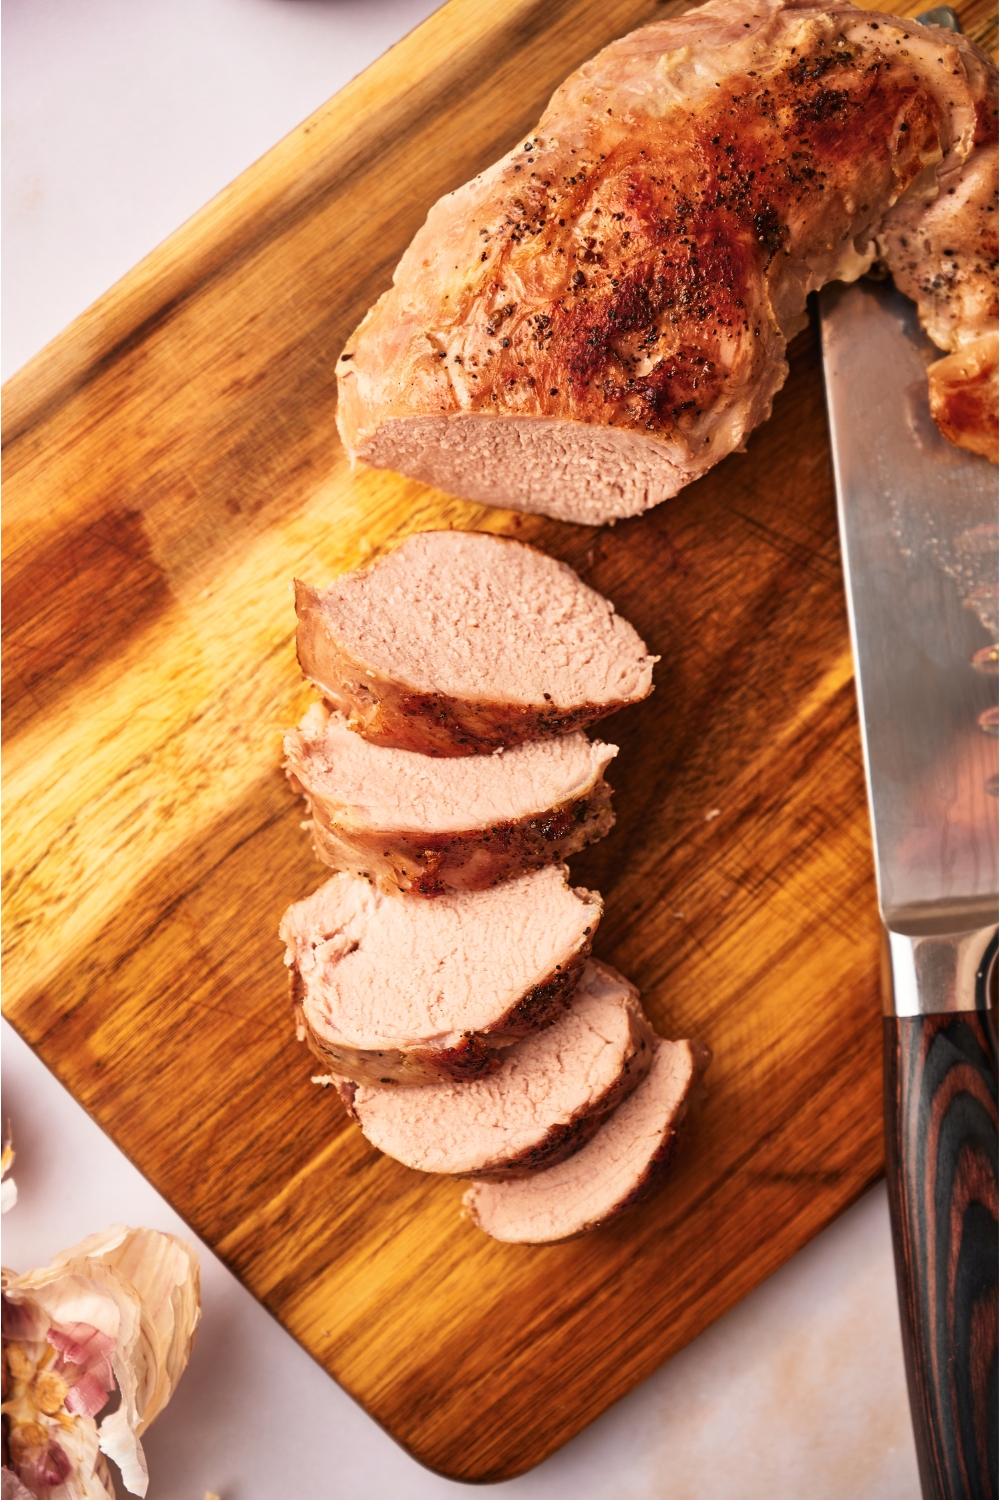 Sliced and cooked pork tenderloin on a wood cutting board.